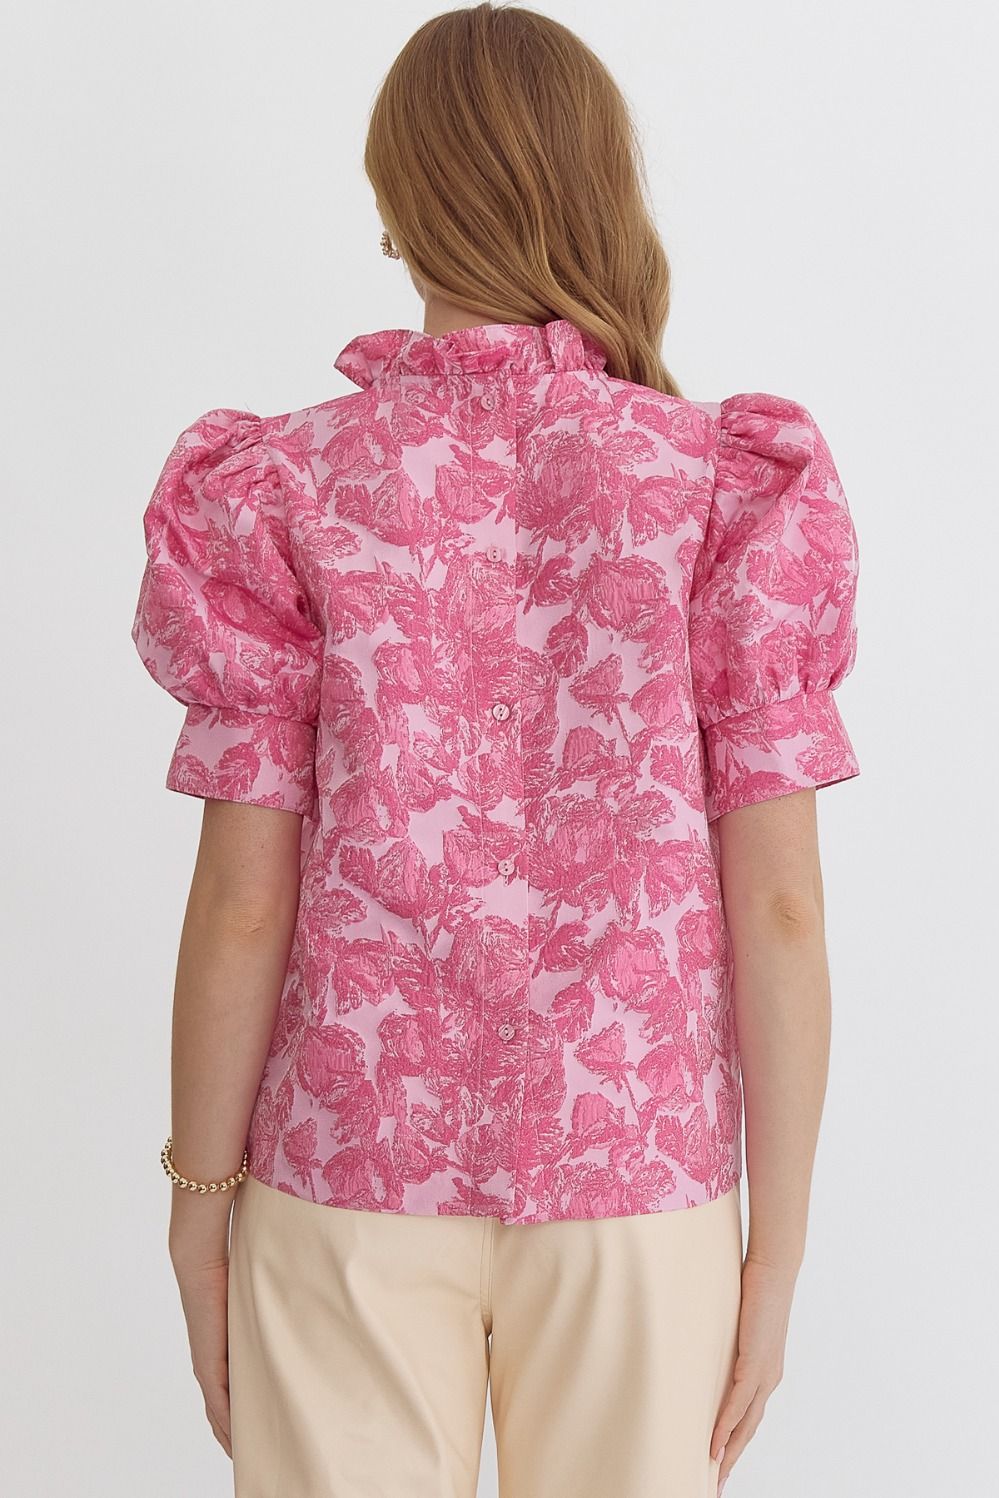 The Chelsea Floral Top